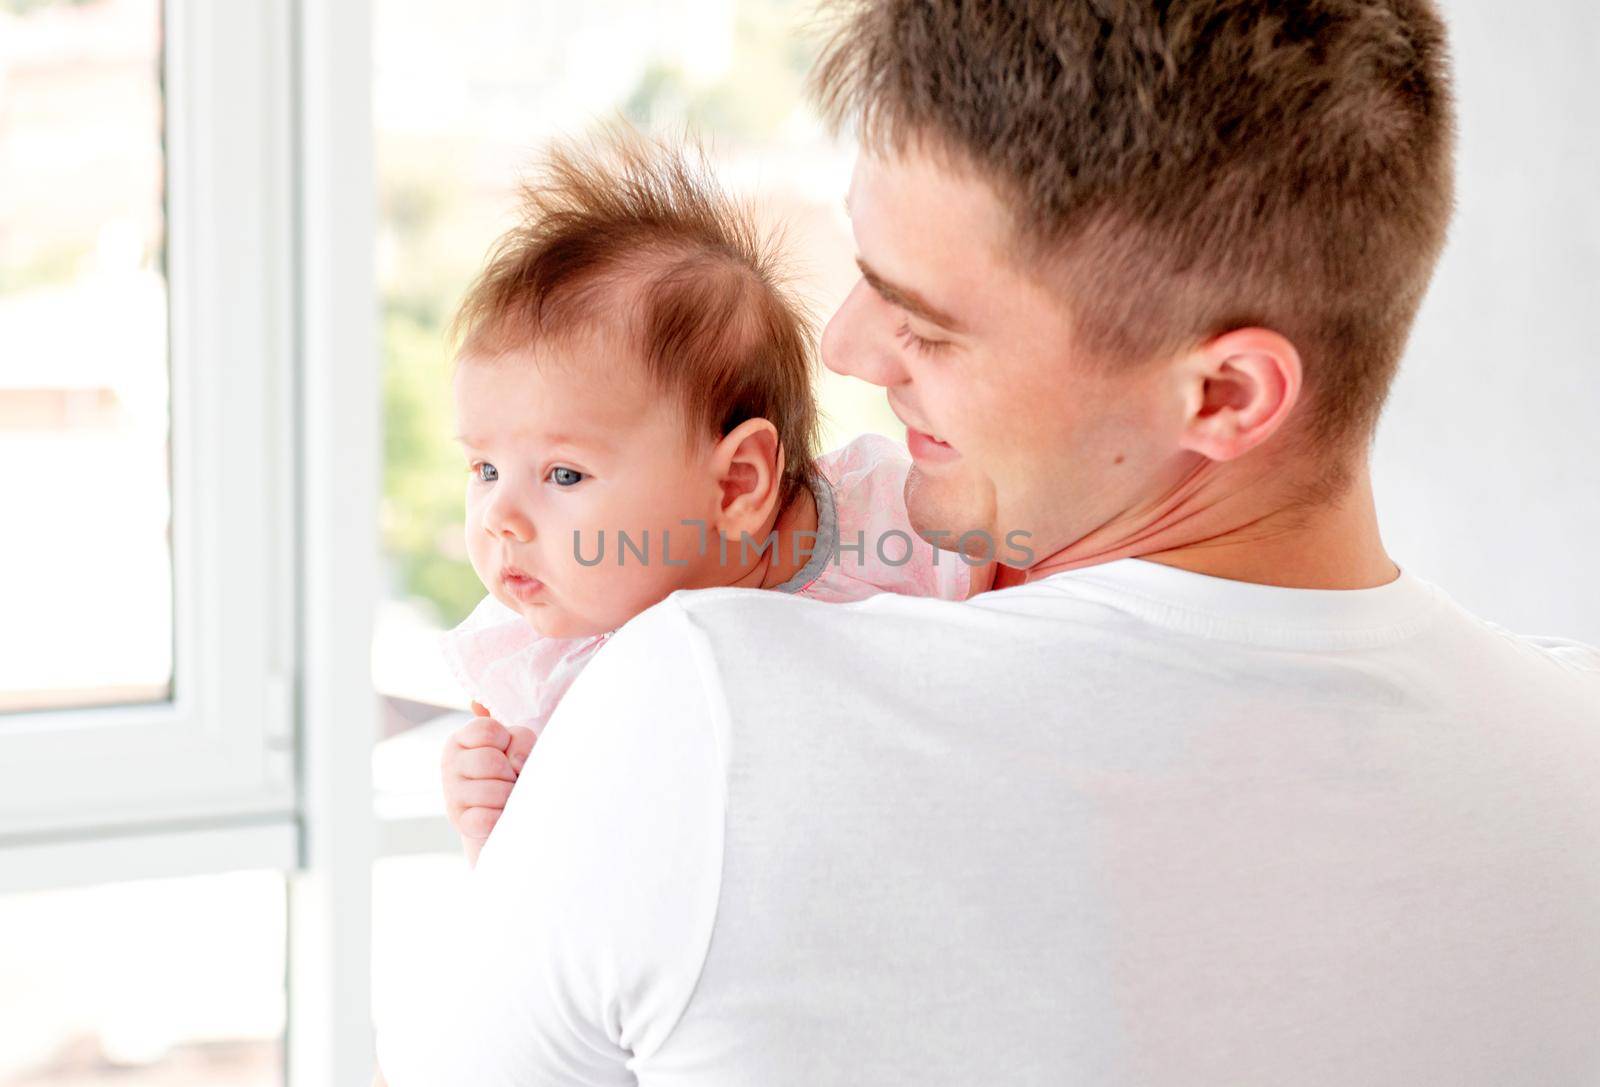 Father embracing infant near window